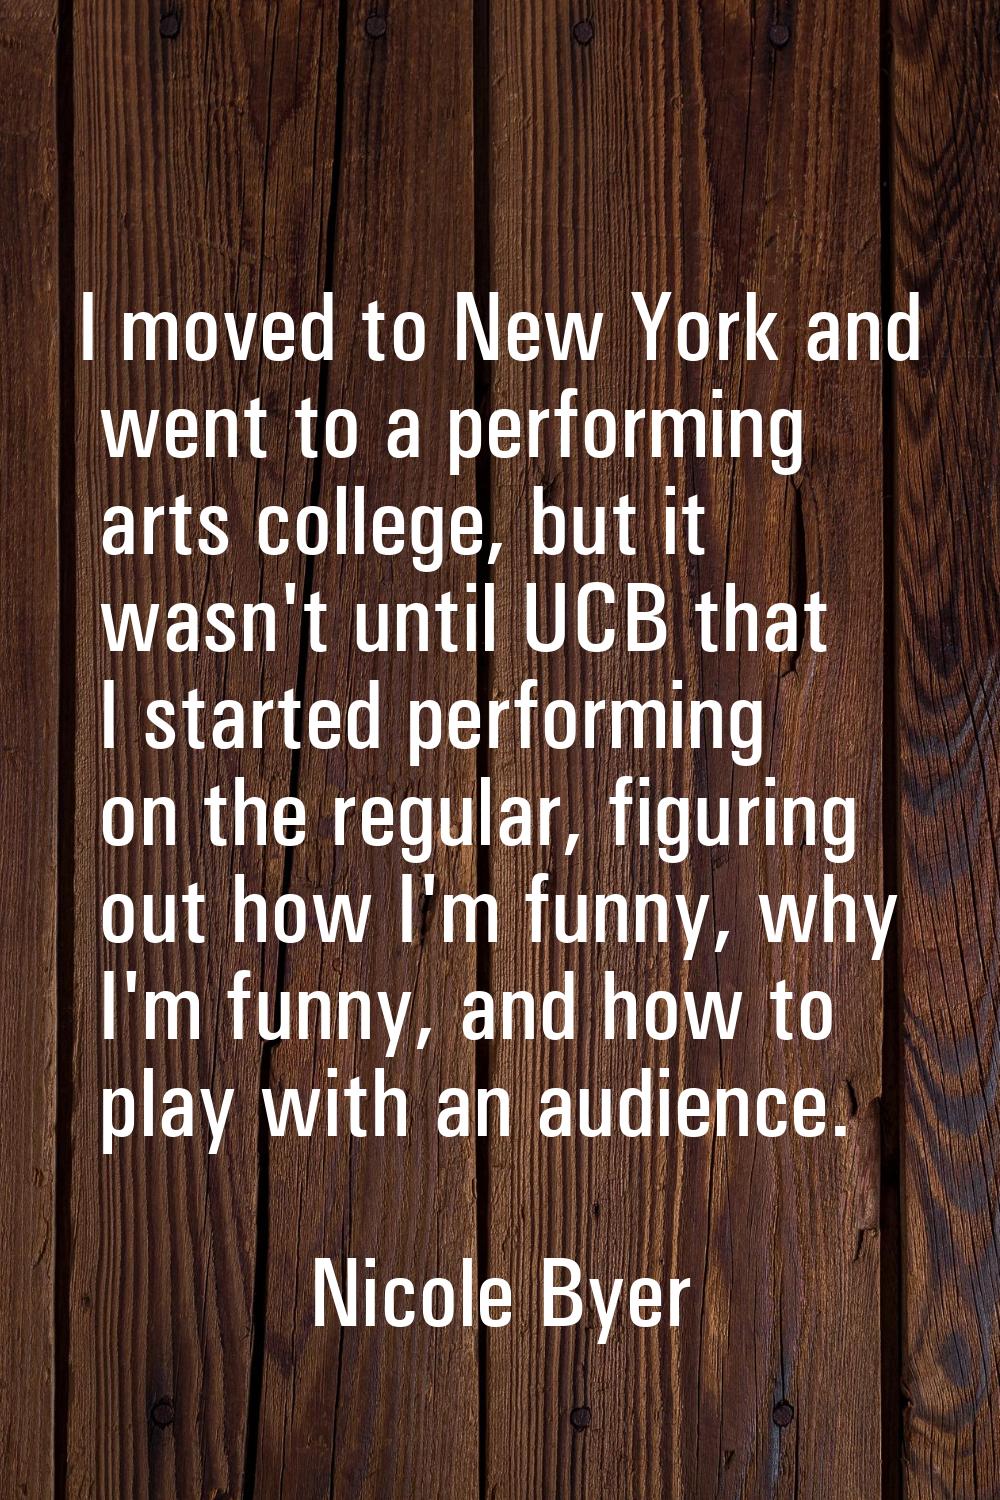 I moved to New York and went to a performing arts college, but it wasn't until UCB that I started p